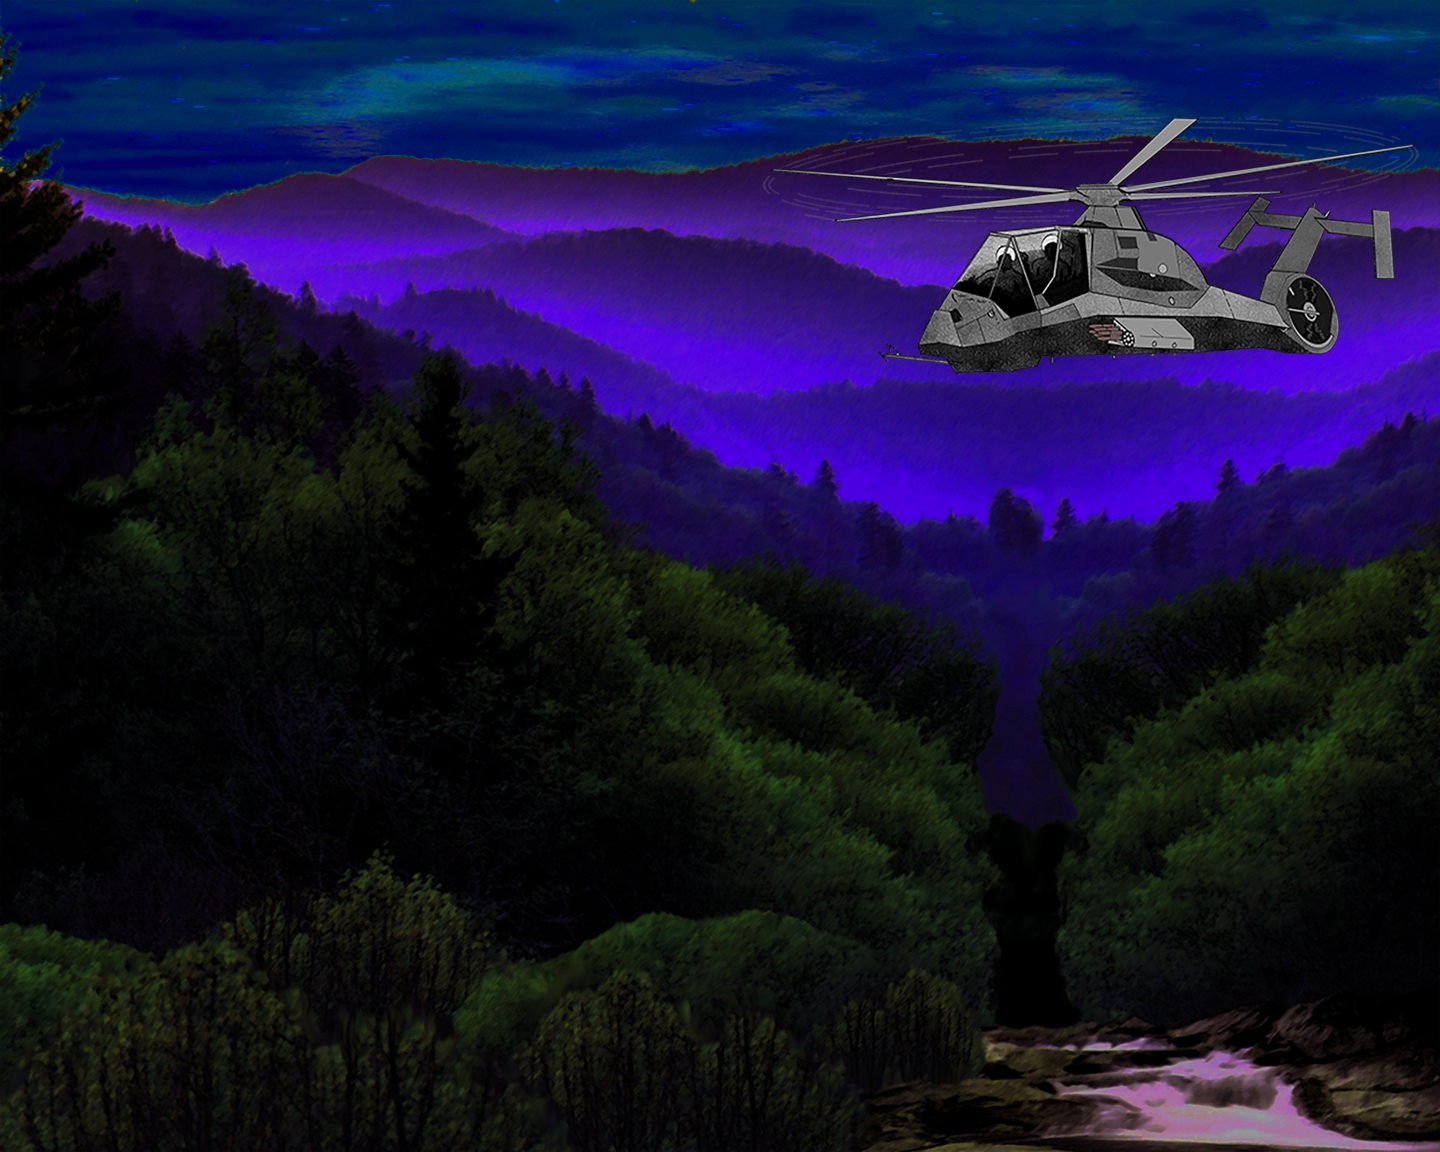 Night scene of the Hornet chopper over a woodland creek with hills receding into background